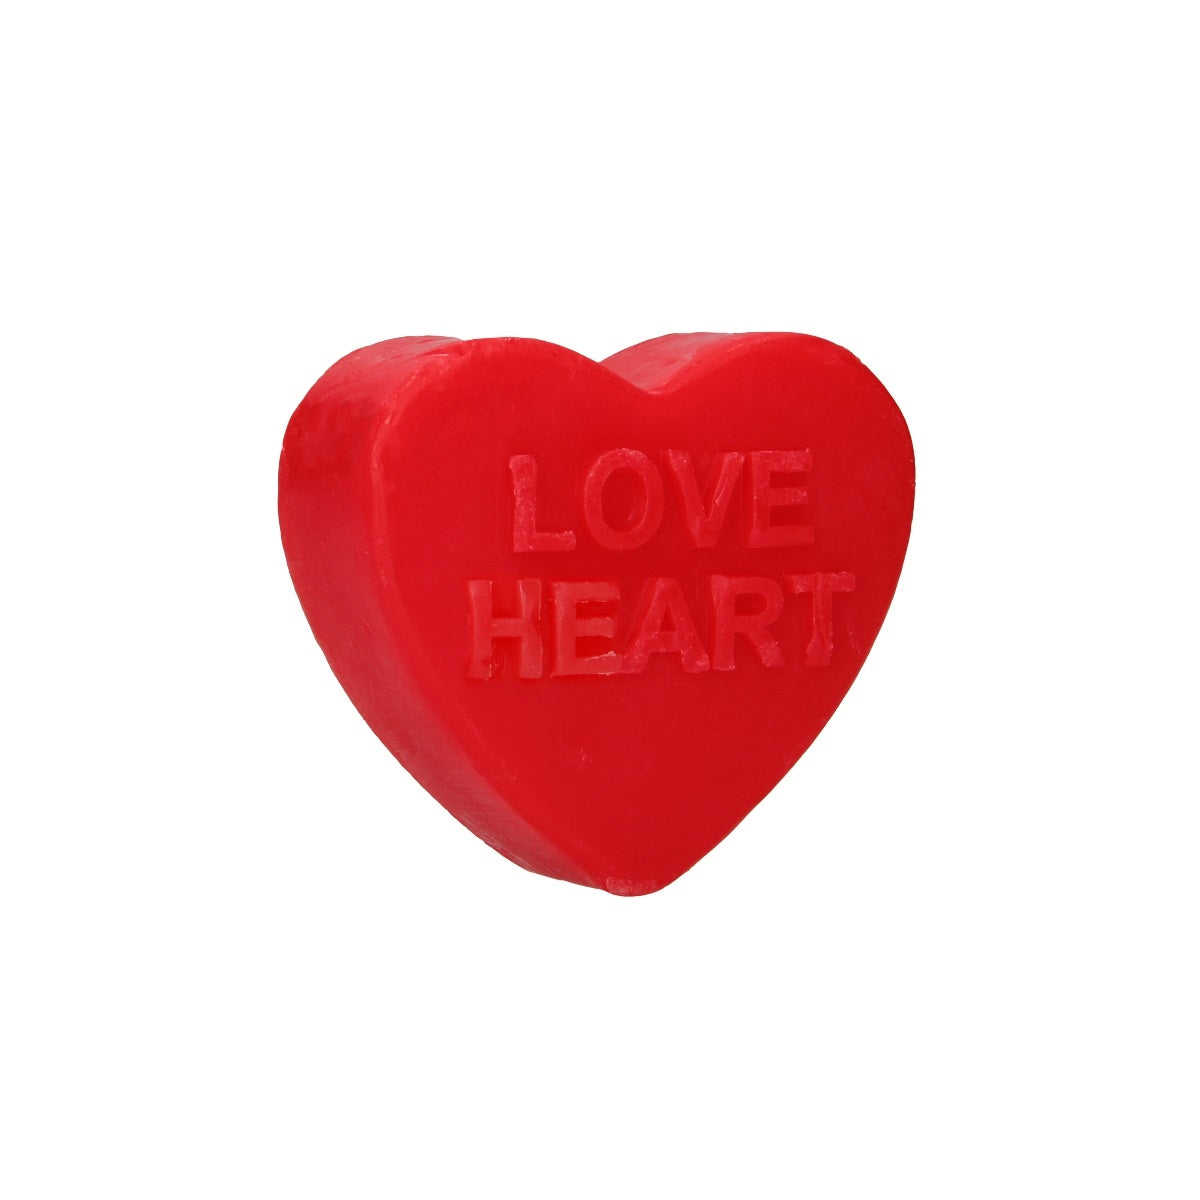 S-Line Love Heart Soap Red